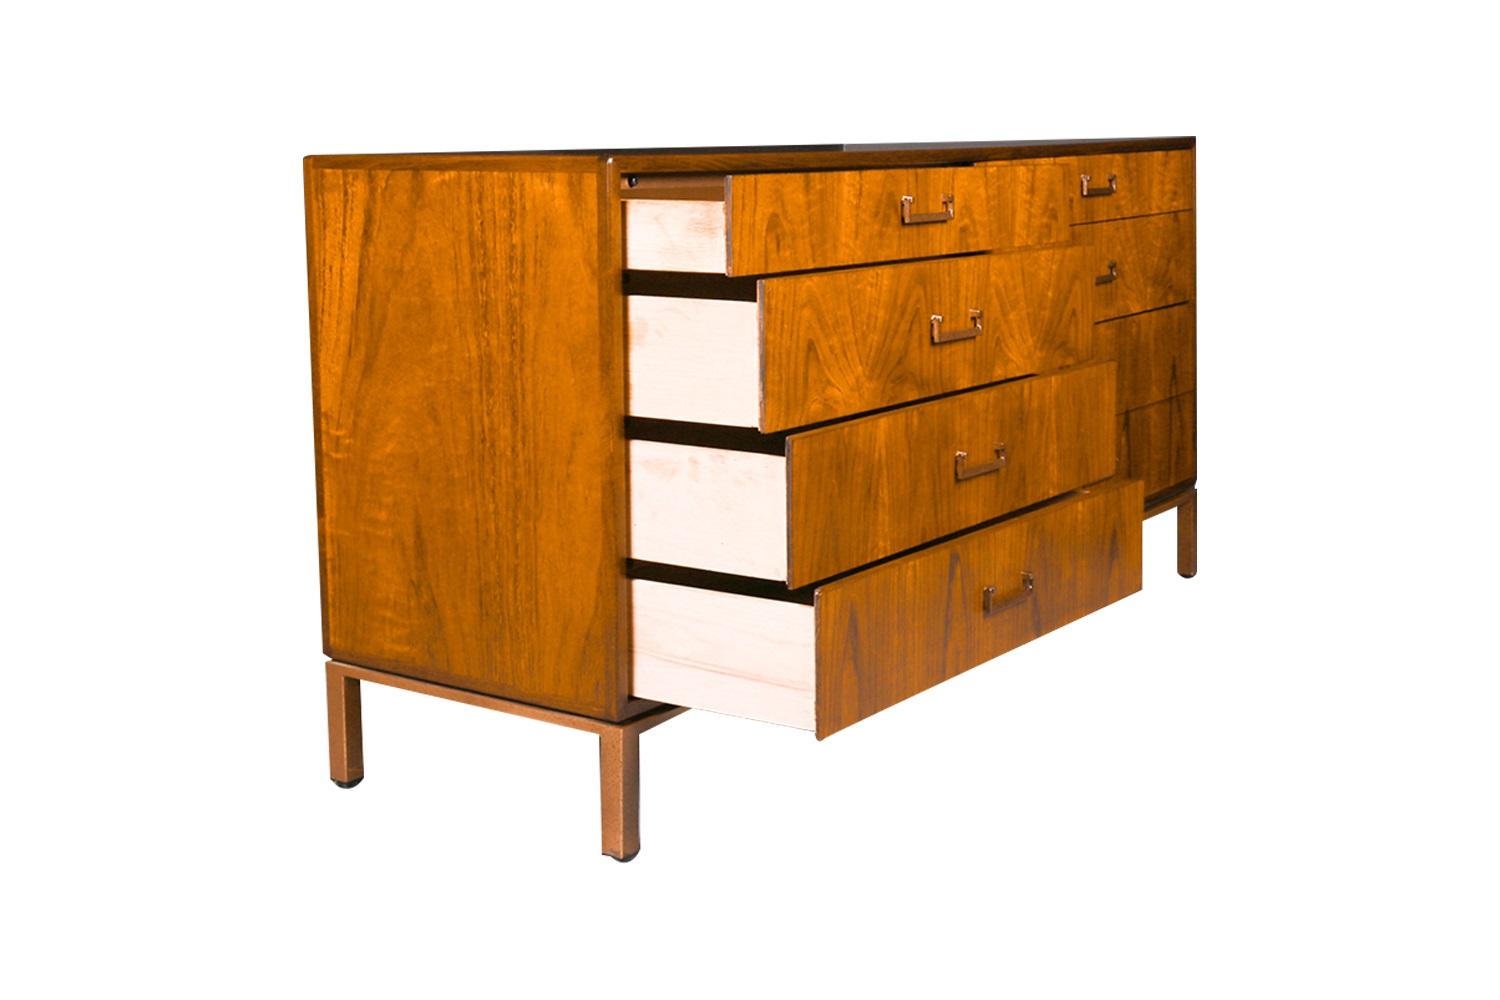 Handsome, richly grained walnut Mid-Century Modern 8 drawer dresser, attributed to Jack Cartwright for Founders Furniture Company, USA circa 1960’s. Expertly crafted, this absolute jewel remains in beautiful clean vintage condition. Features a